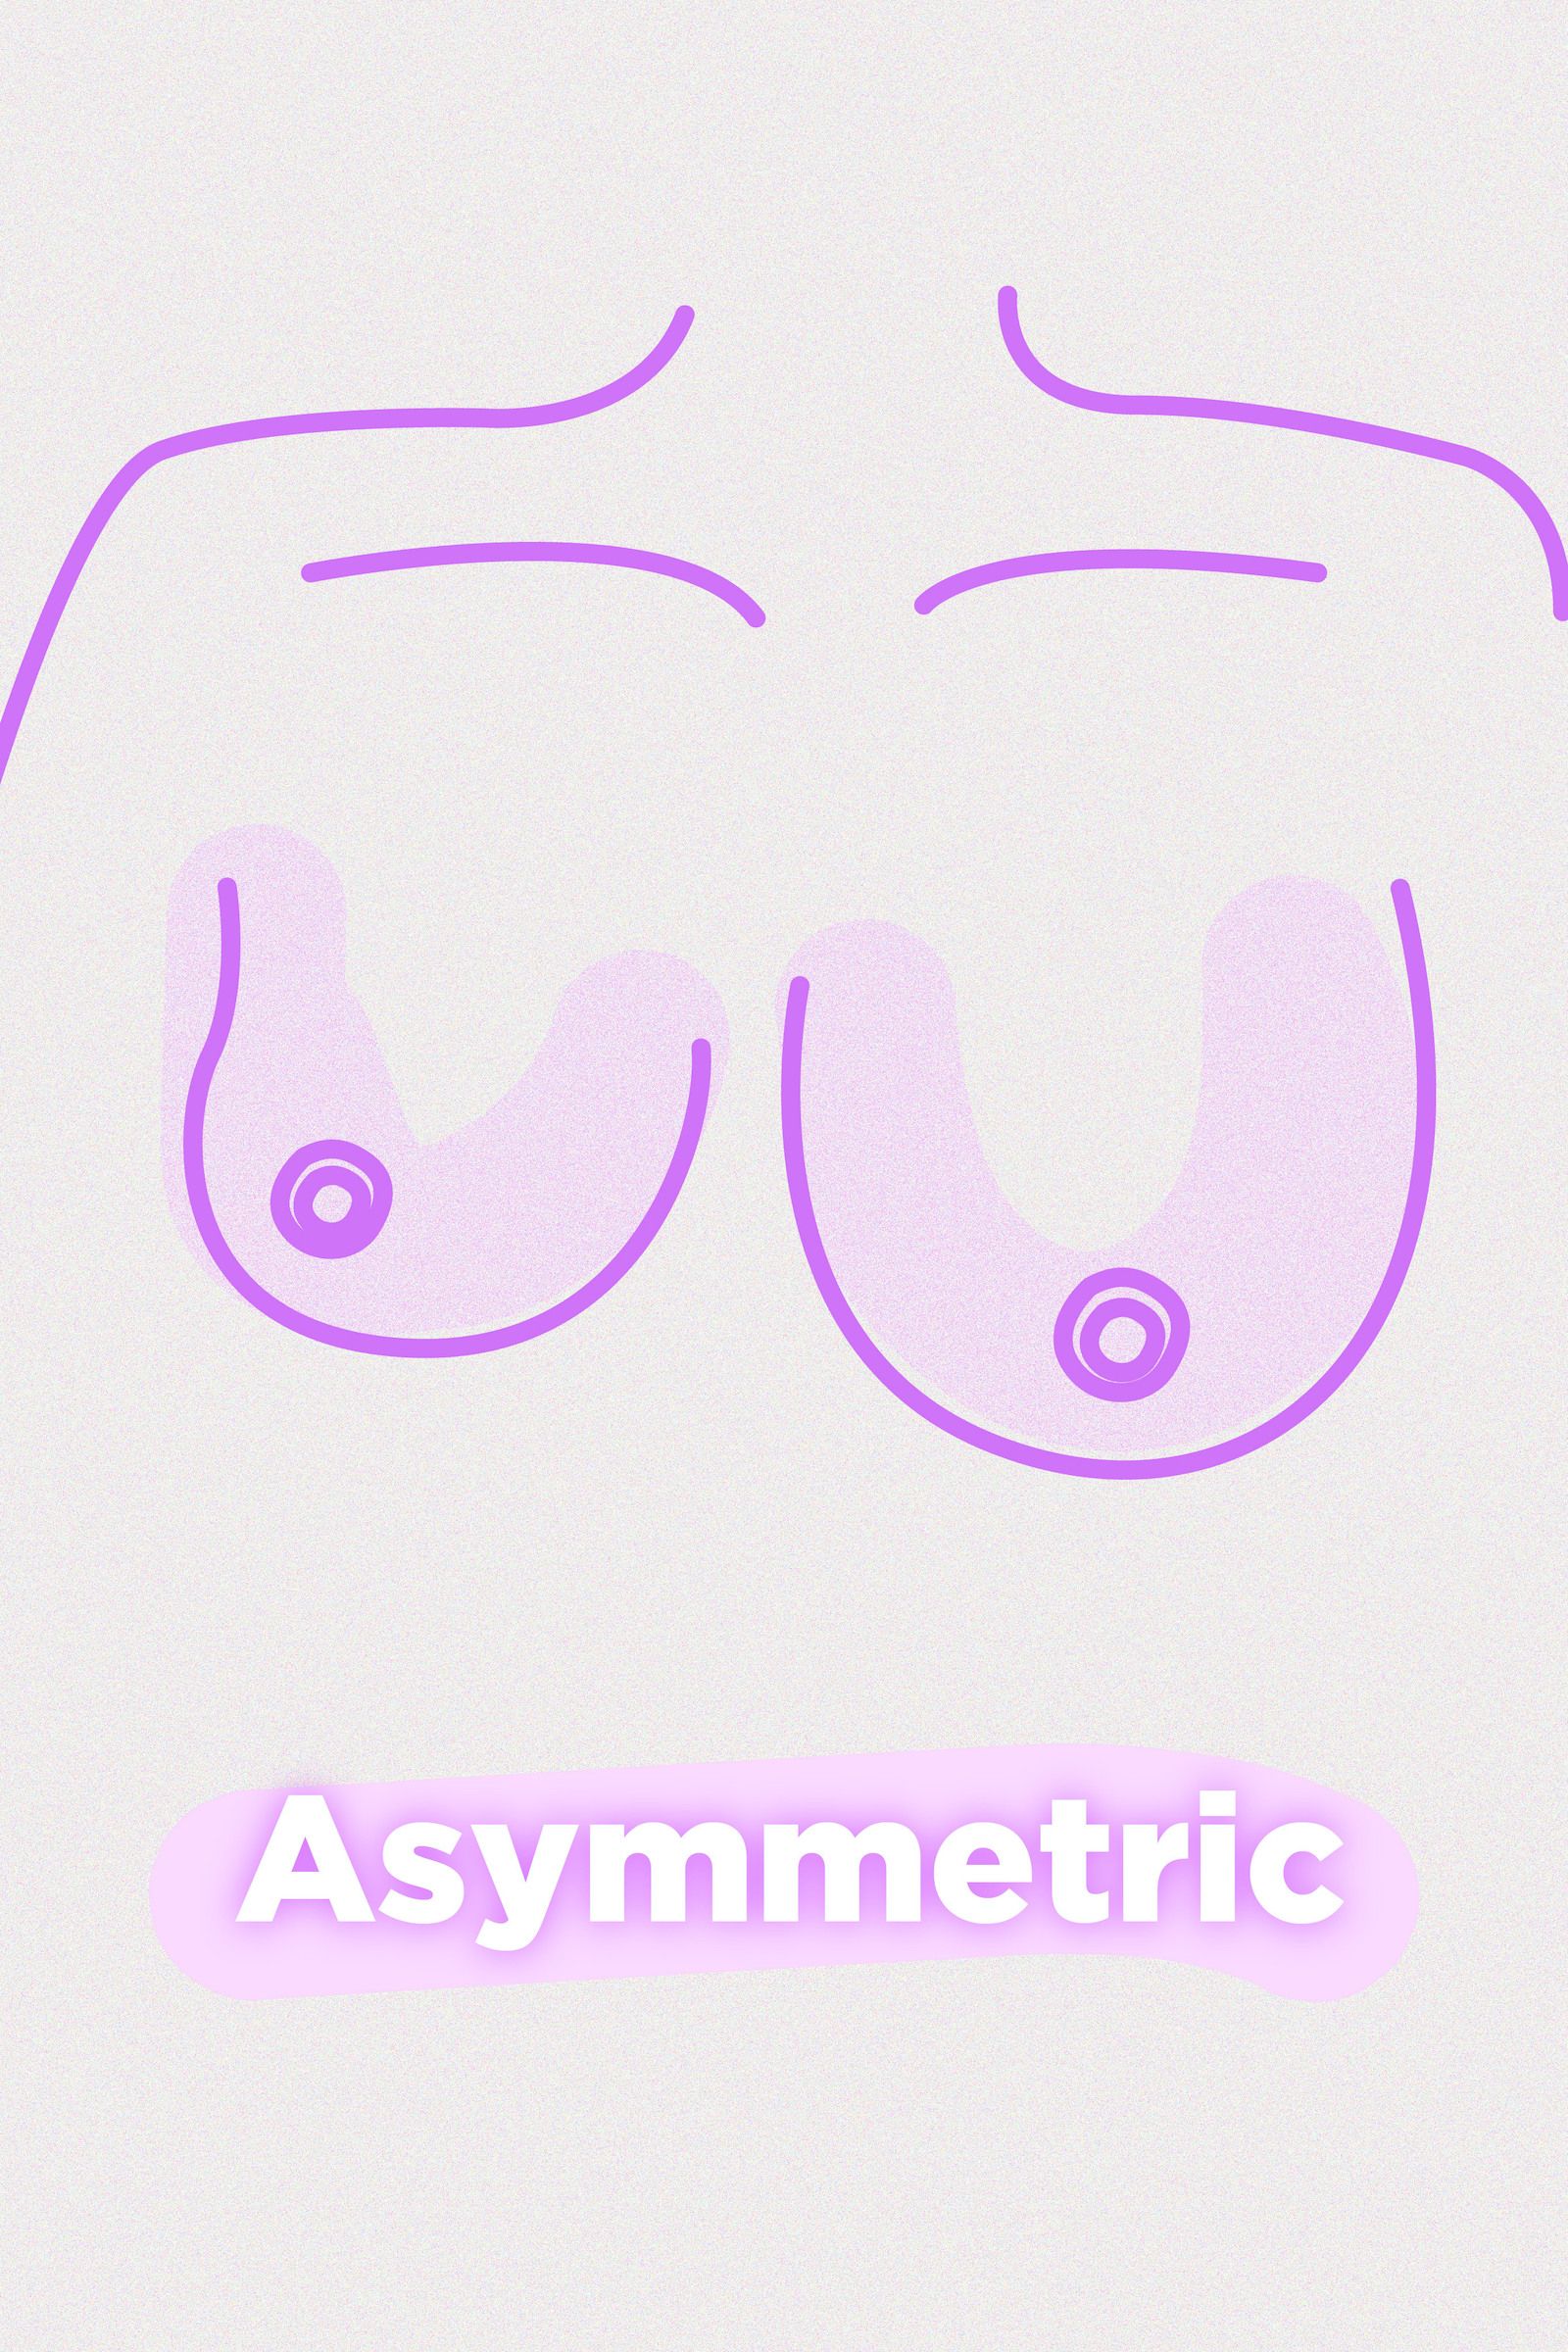 8 Types of Boobs in the World